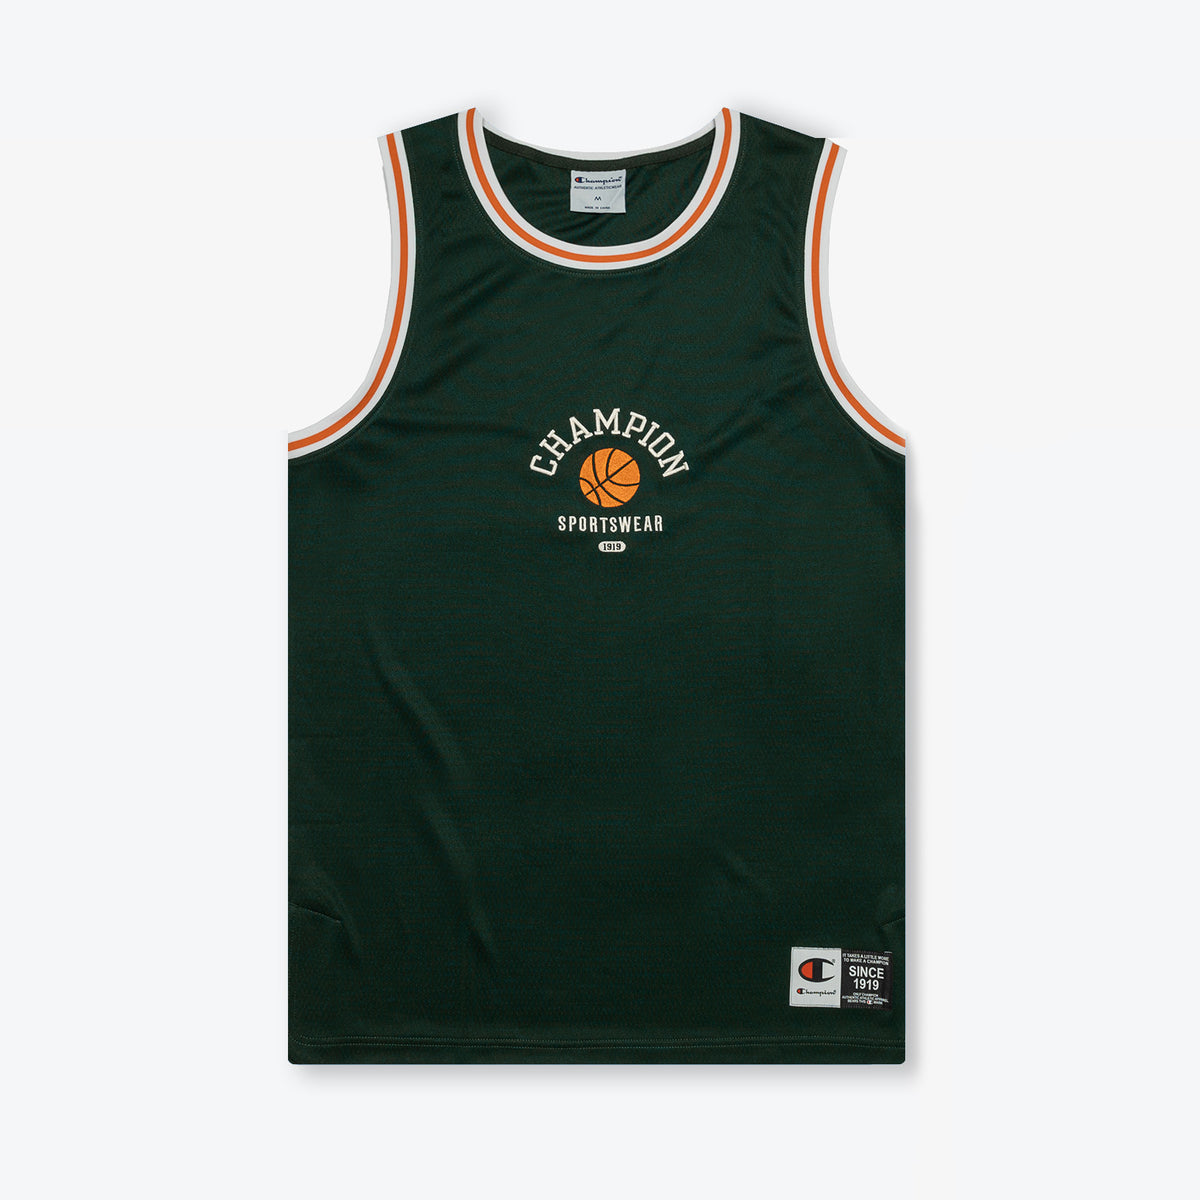 Clubhouse Basketball Jersey - Green